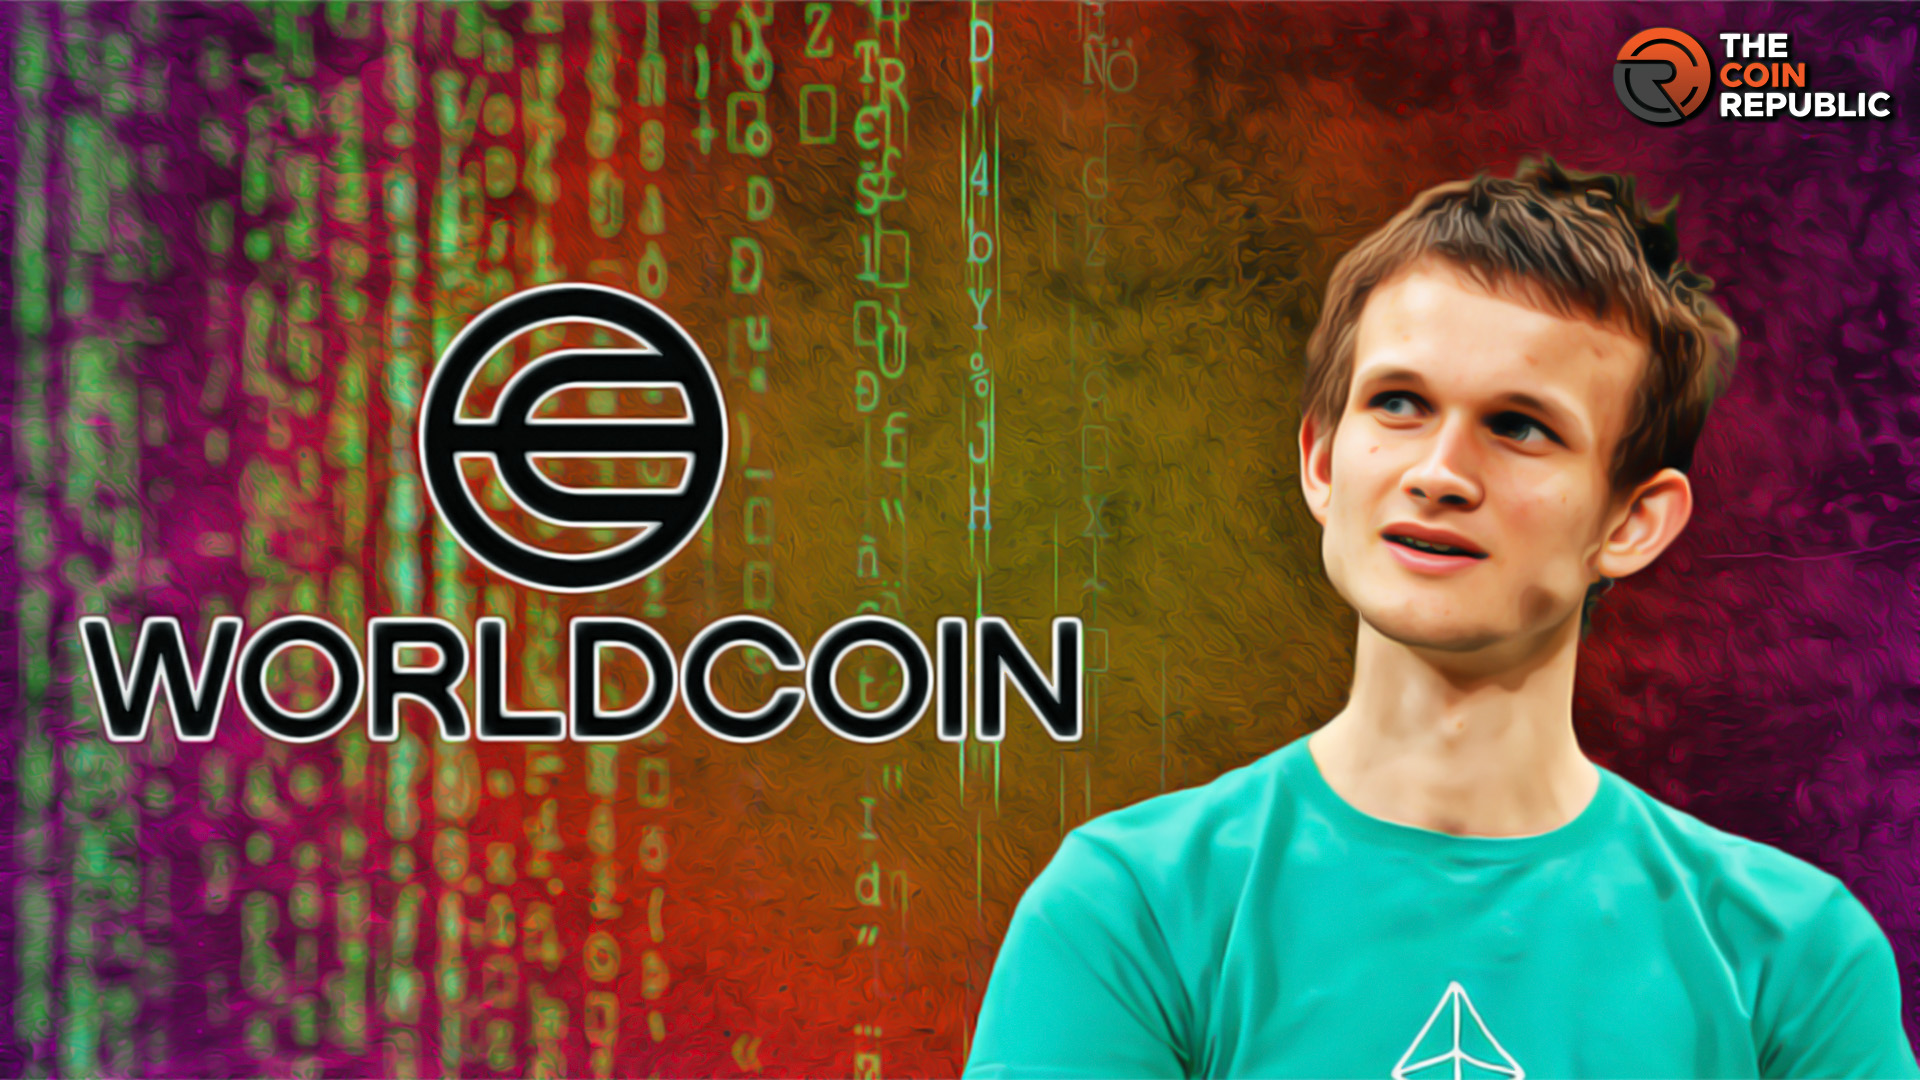 Why is Ethereum’s Co-founder Buterin Concerned About Worldcoin?